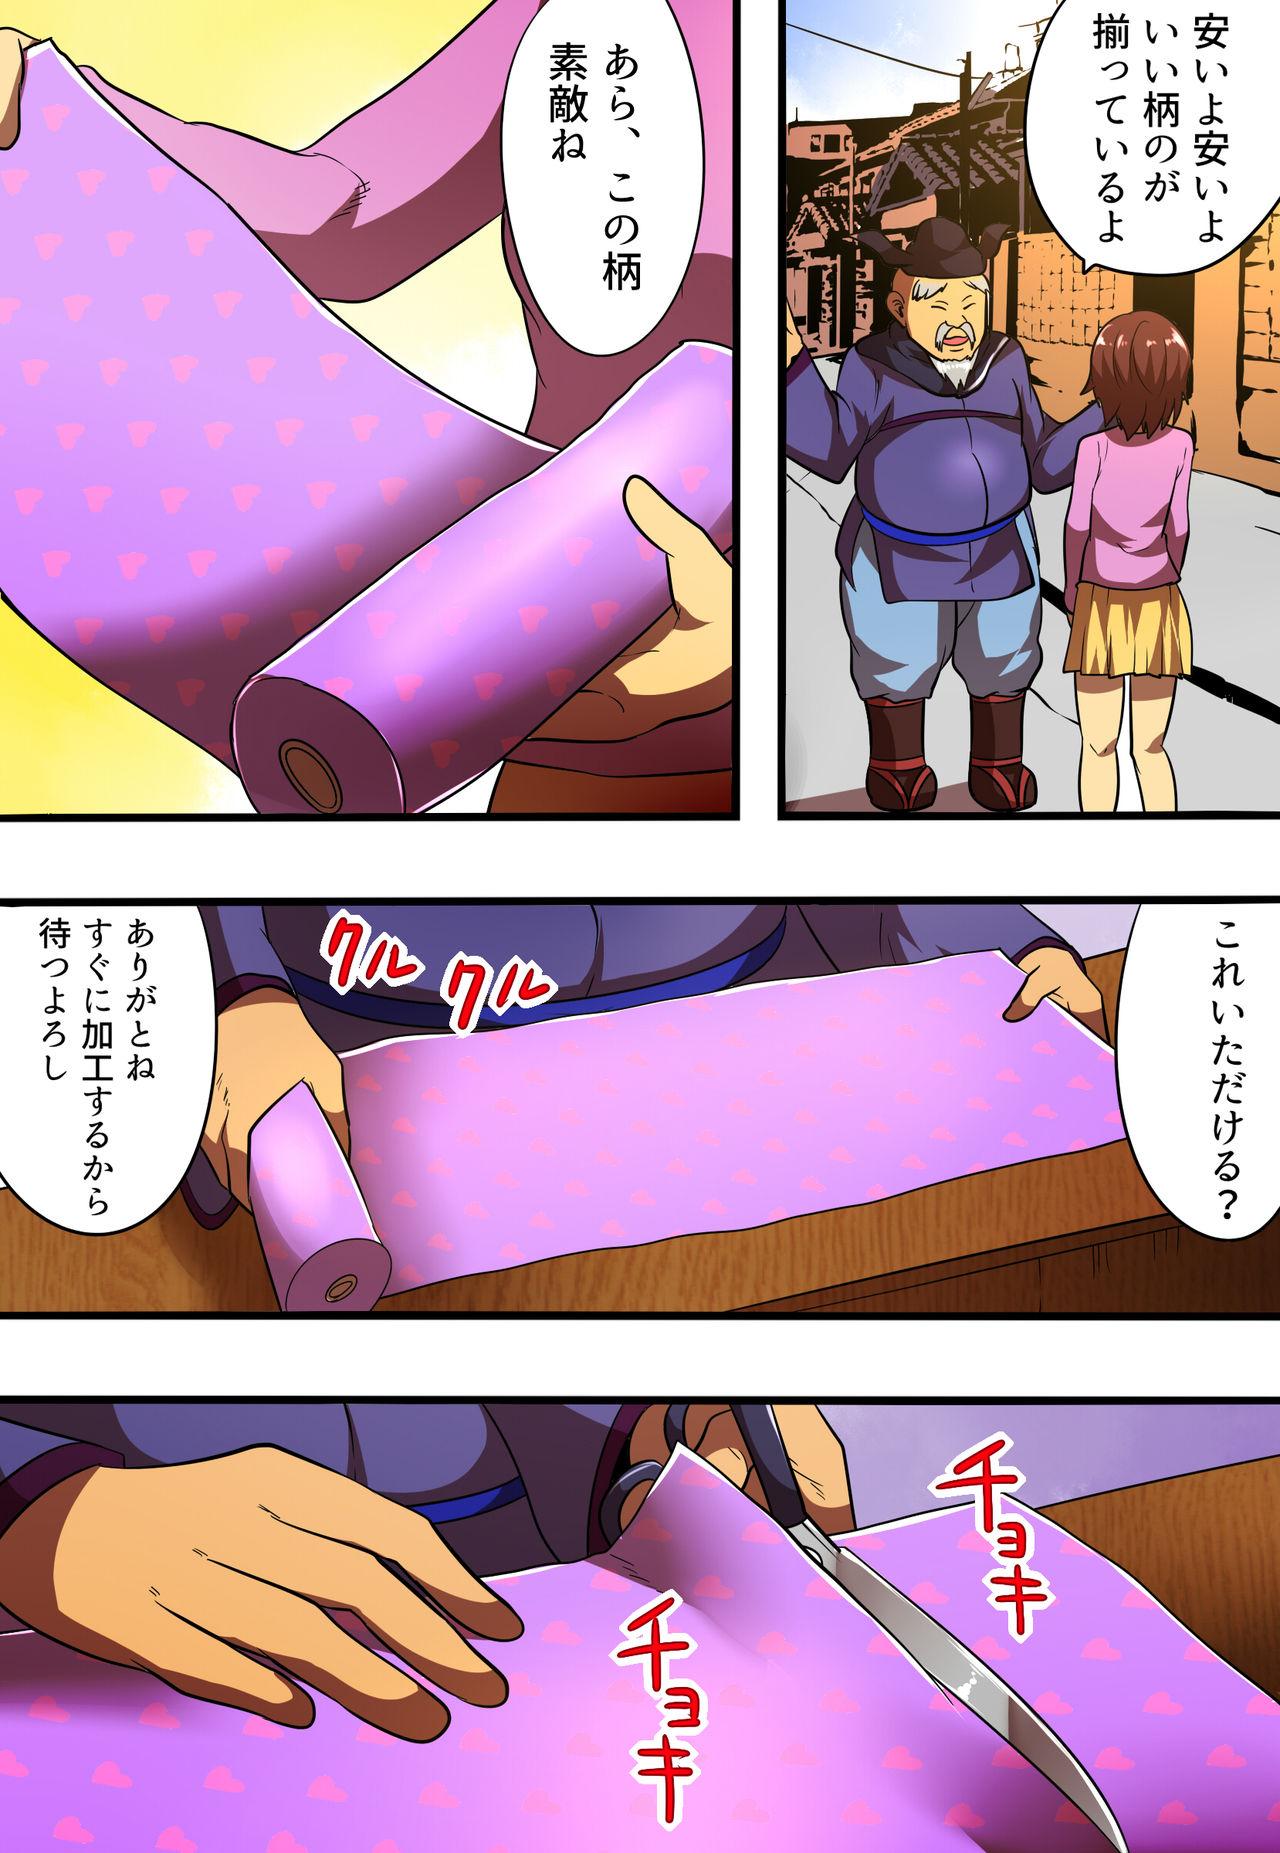 Milf shinenkan Comic of Textile-ification ghost storys Glamour Porn - Page 6